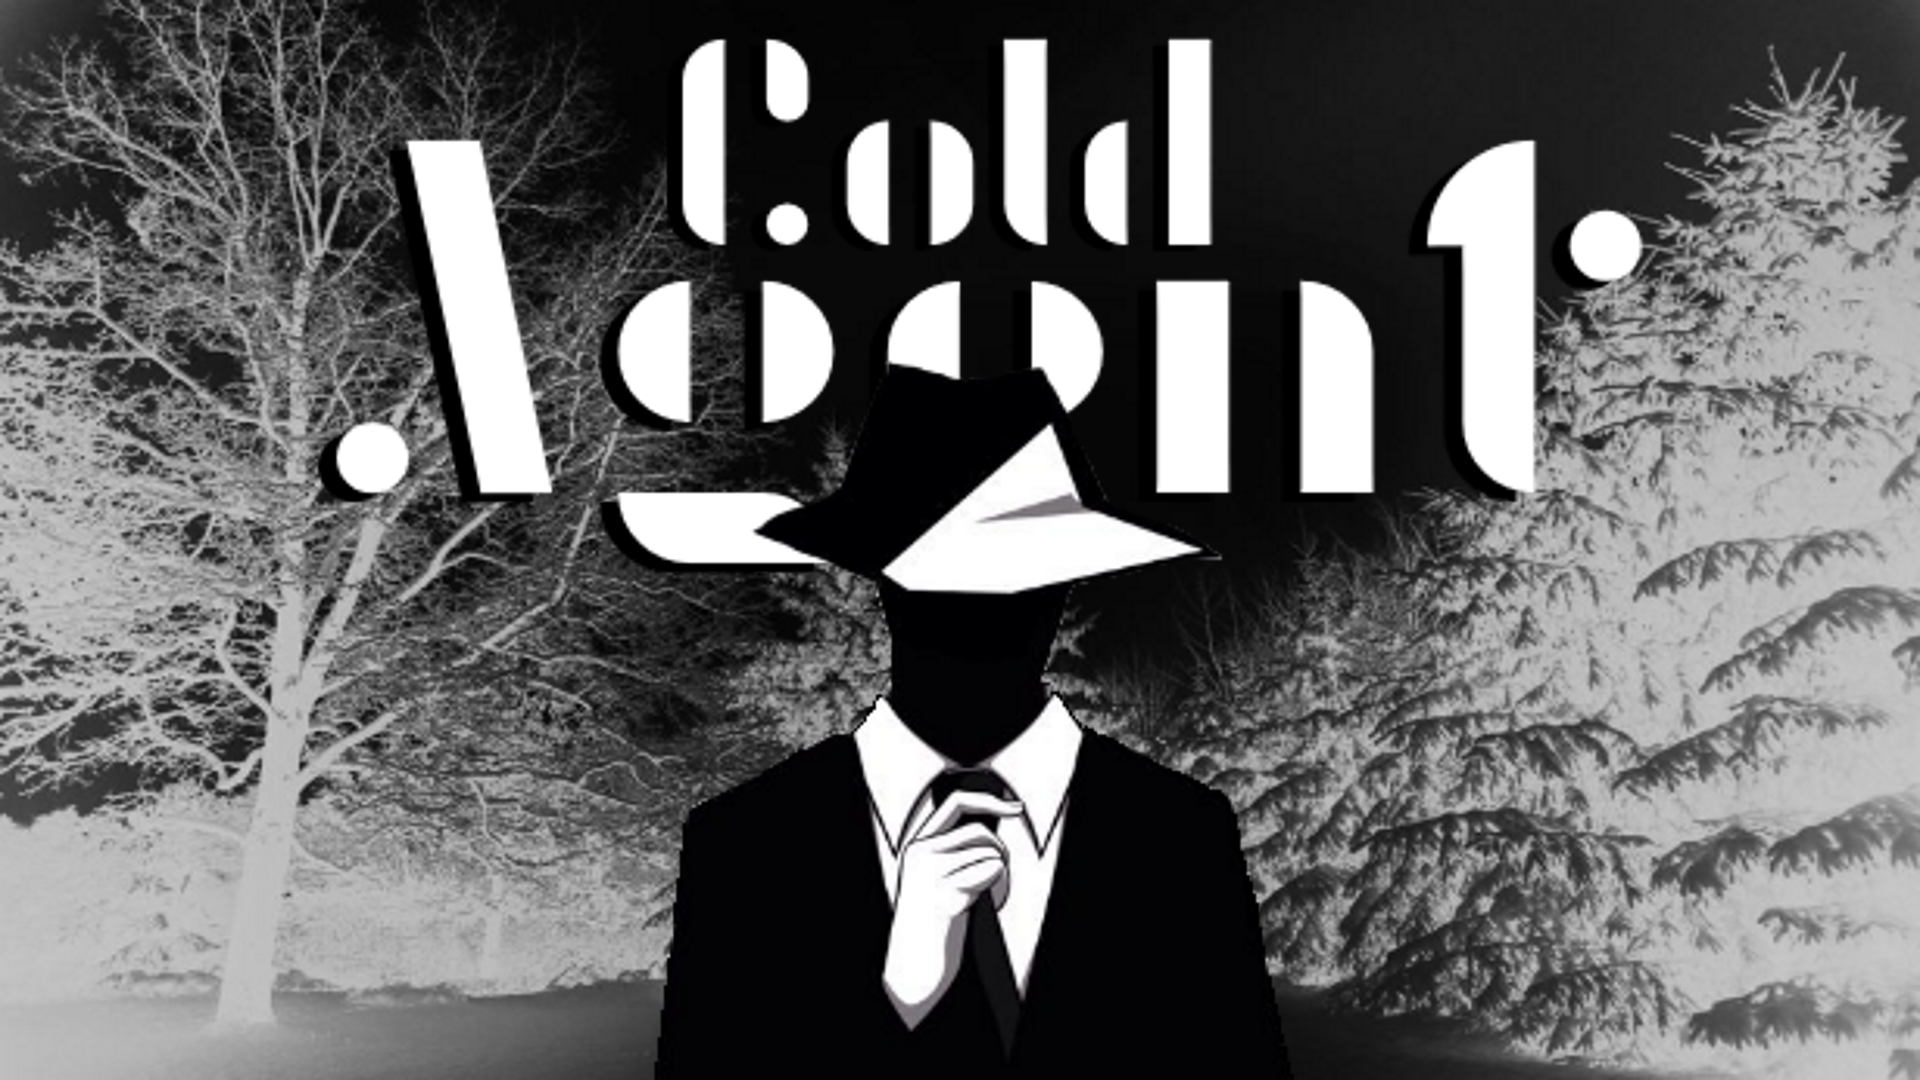 Cold Agent